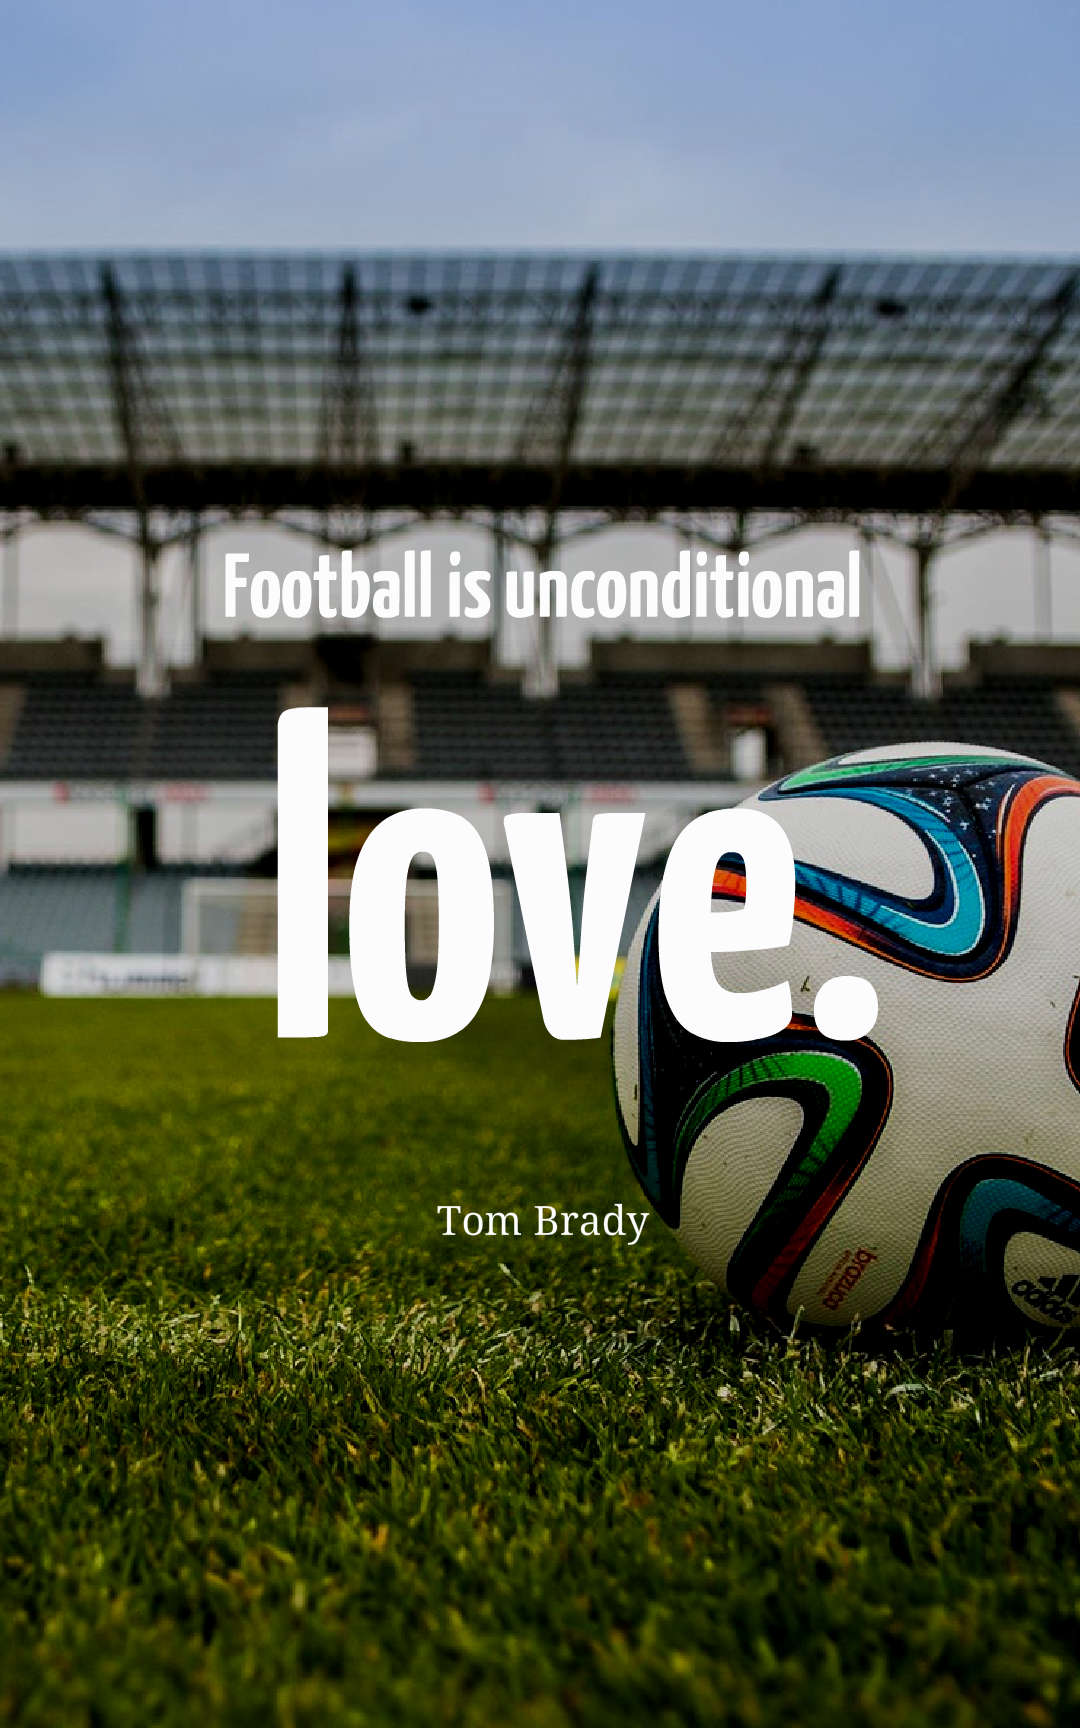 Football is unconditional love.